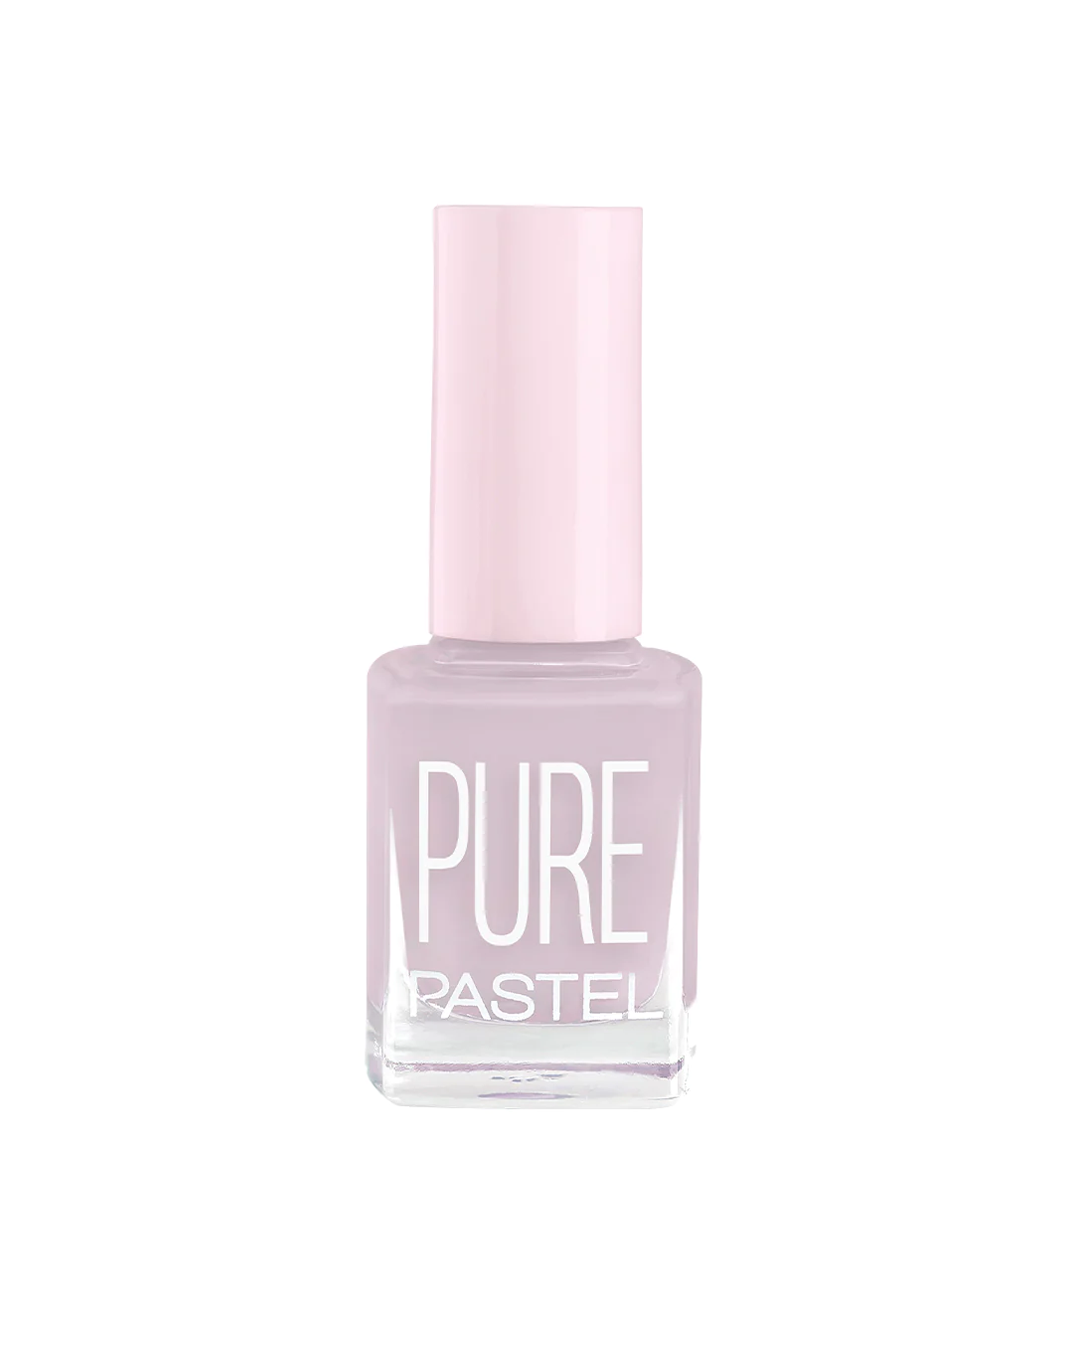 No More Boring Nails When You Have These Pretty Pastel Nail Polishes